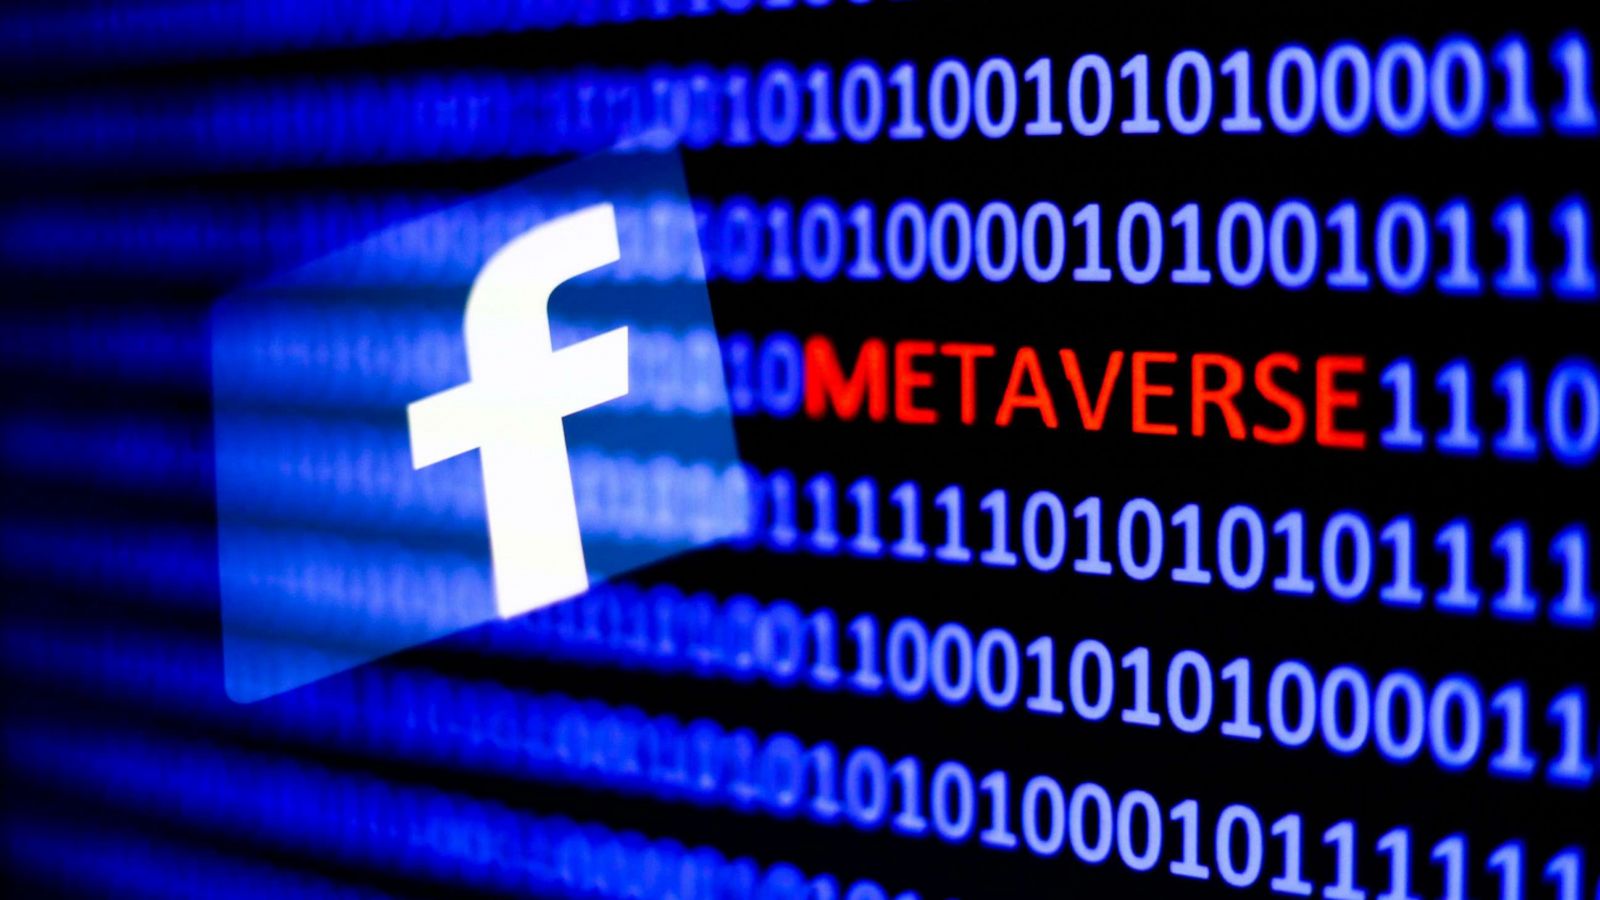 Facebook Dives Into the Metaverse With Its Name Change